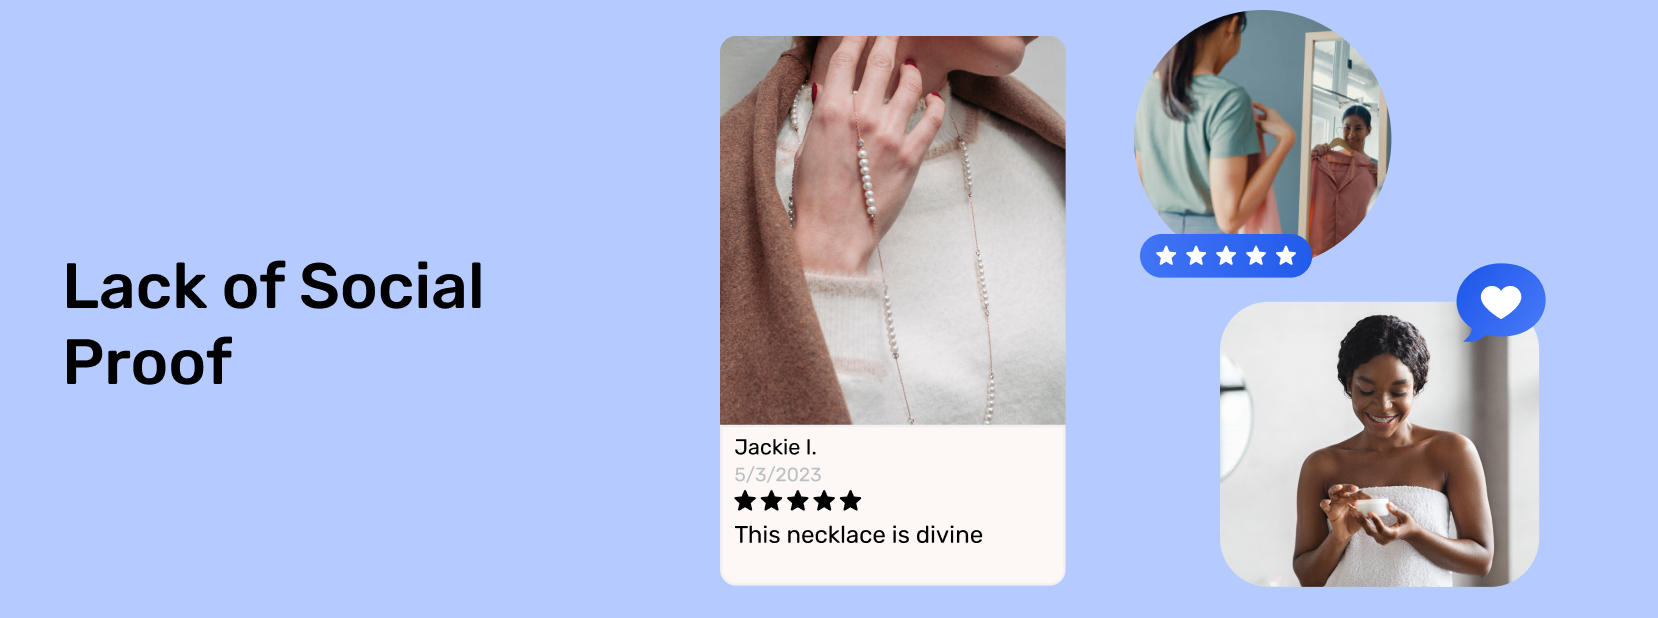 Image showing multiple website UI components on the right side that display social proof such as likes and interest for products, and in the middle a component with a review saying 'This necklace is divine.' The image demonstrates how to present and highlights the importance of social proof for improving your Shopify store's conversion rate.